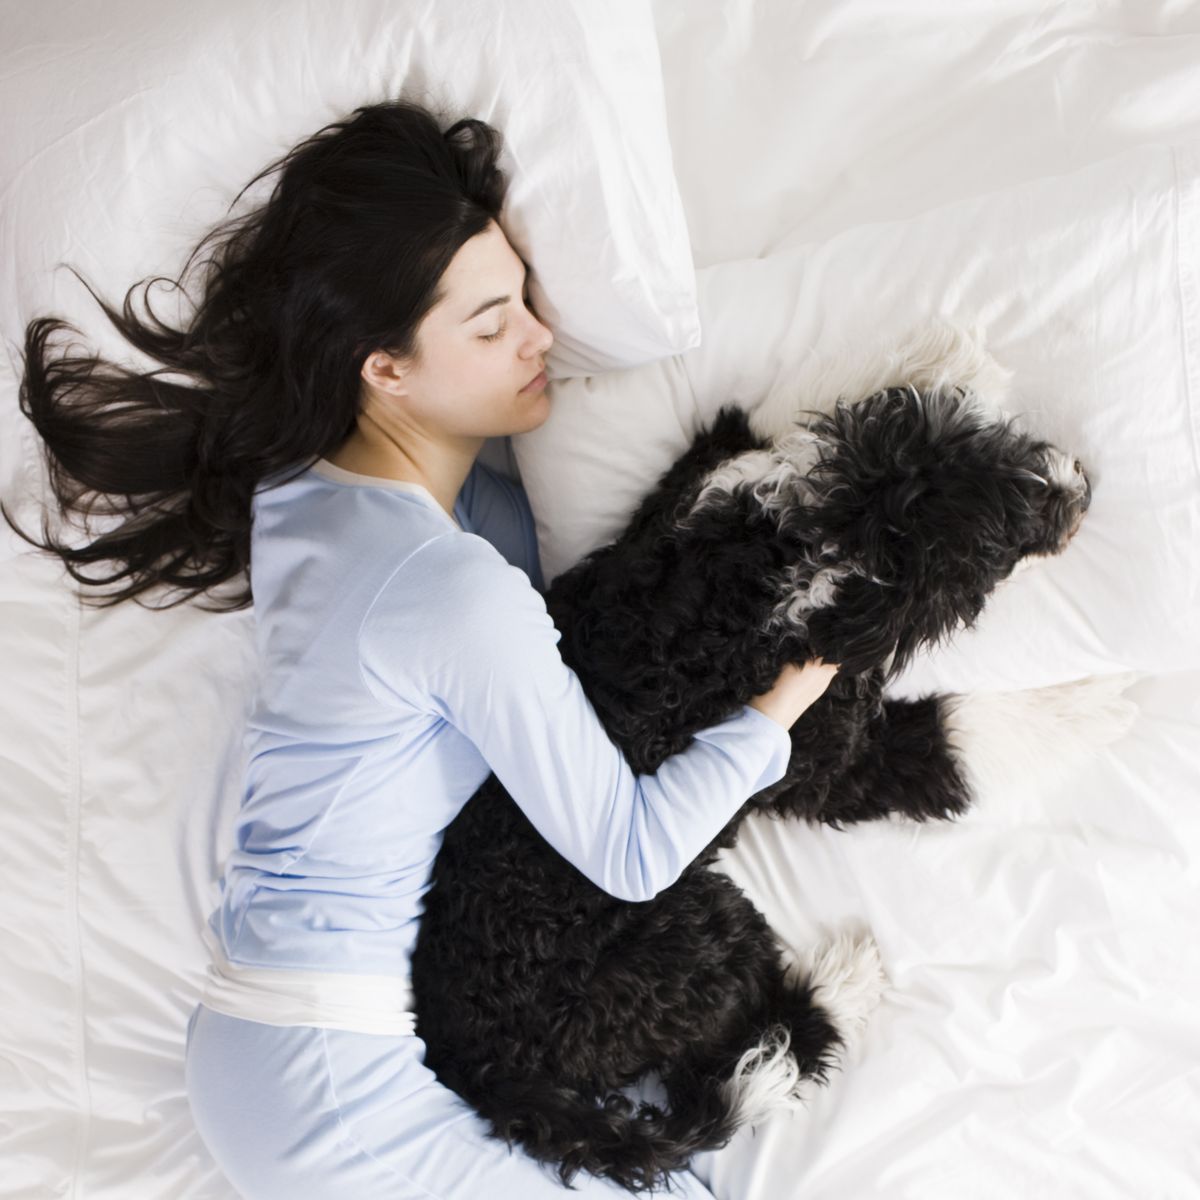 woman and her dog in bed